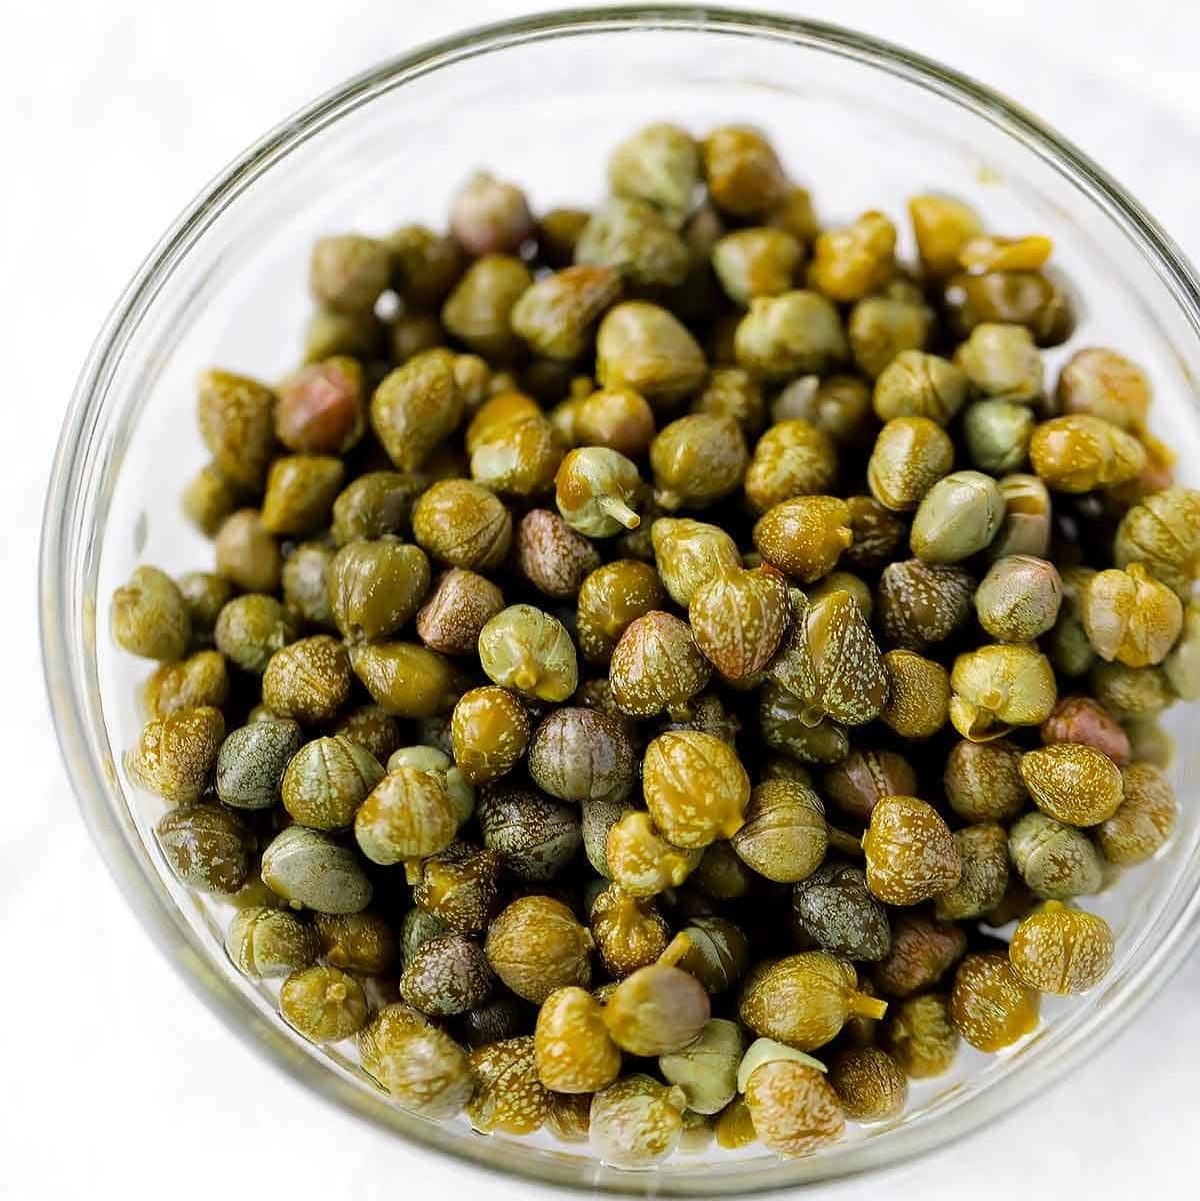 A close up photo of capers in a clear bowl with a white background.